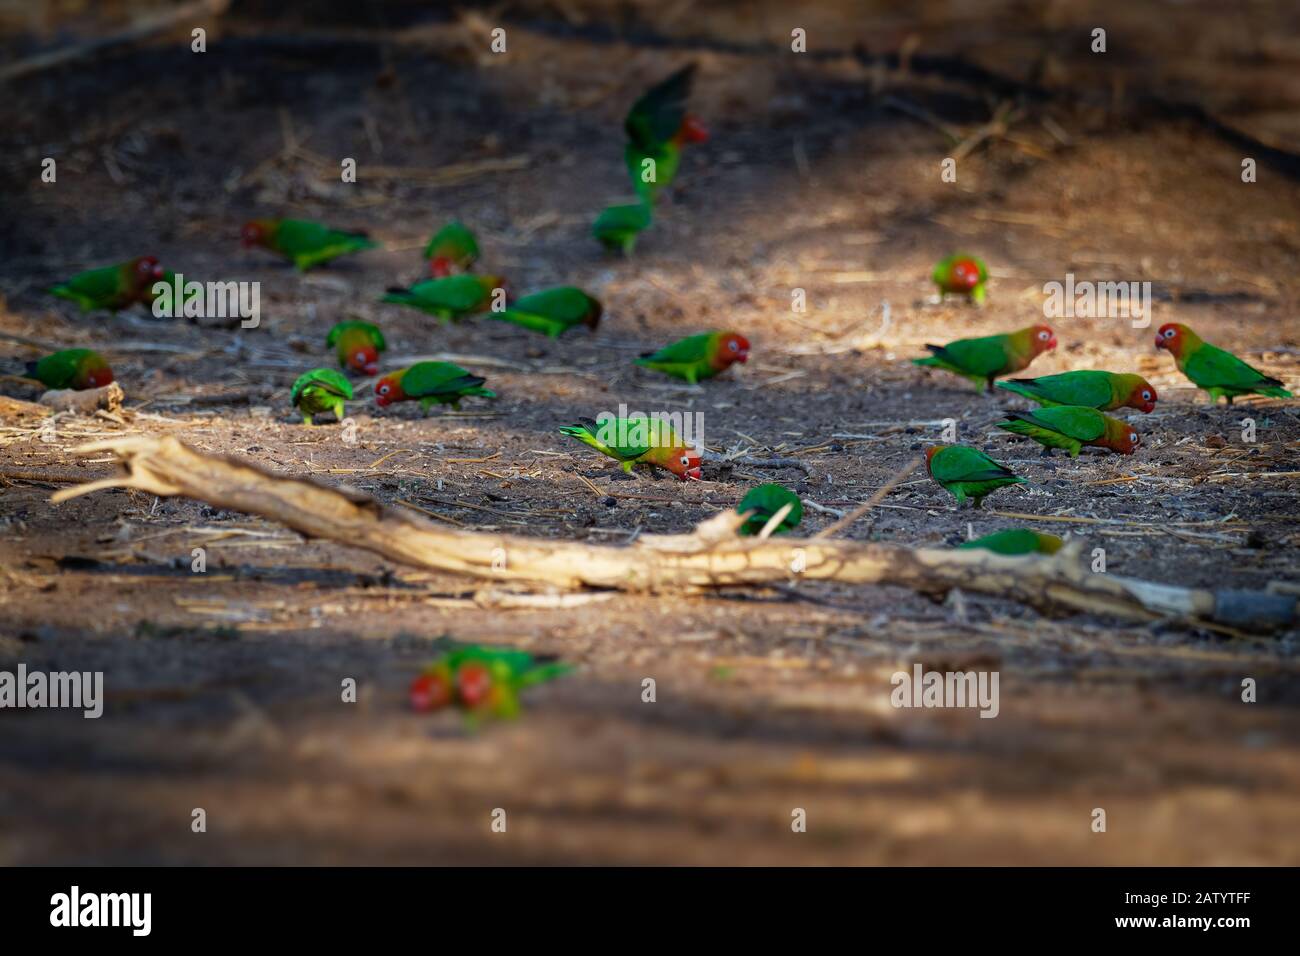 Lilians Lovebird - Agapornis lilianae also known as the Nyasa lovebird, is a small African parrot species of the lovebird genus. It is mainly green an Stock Photo